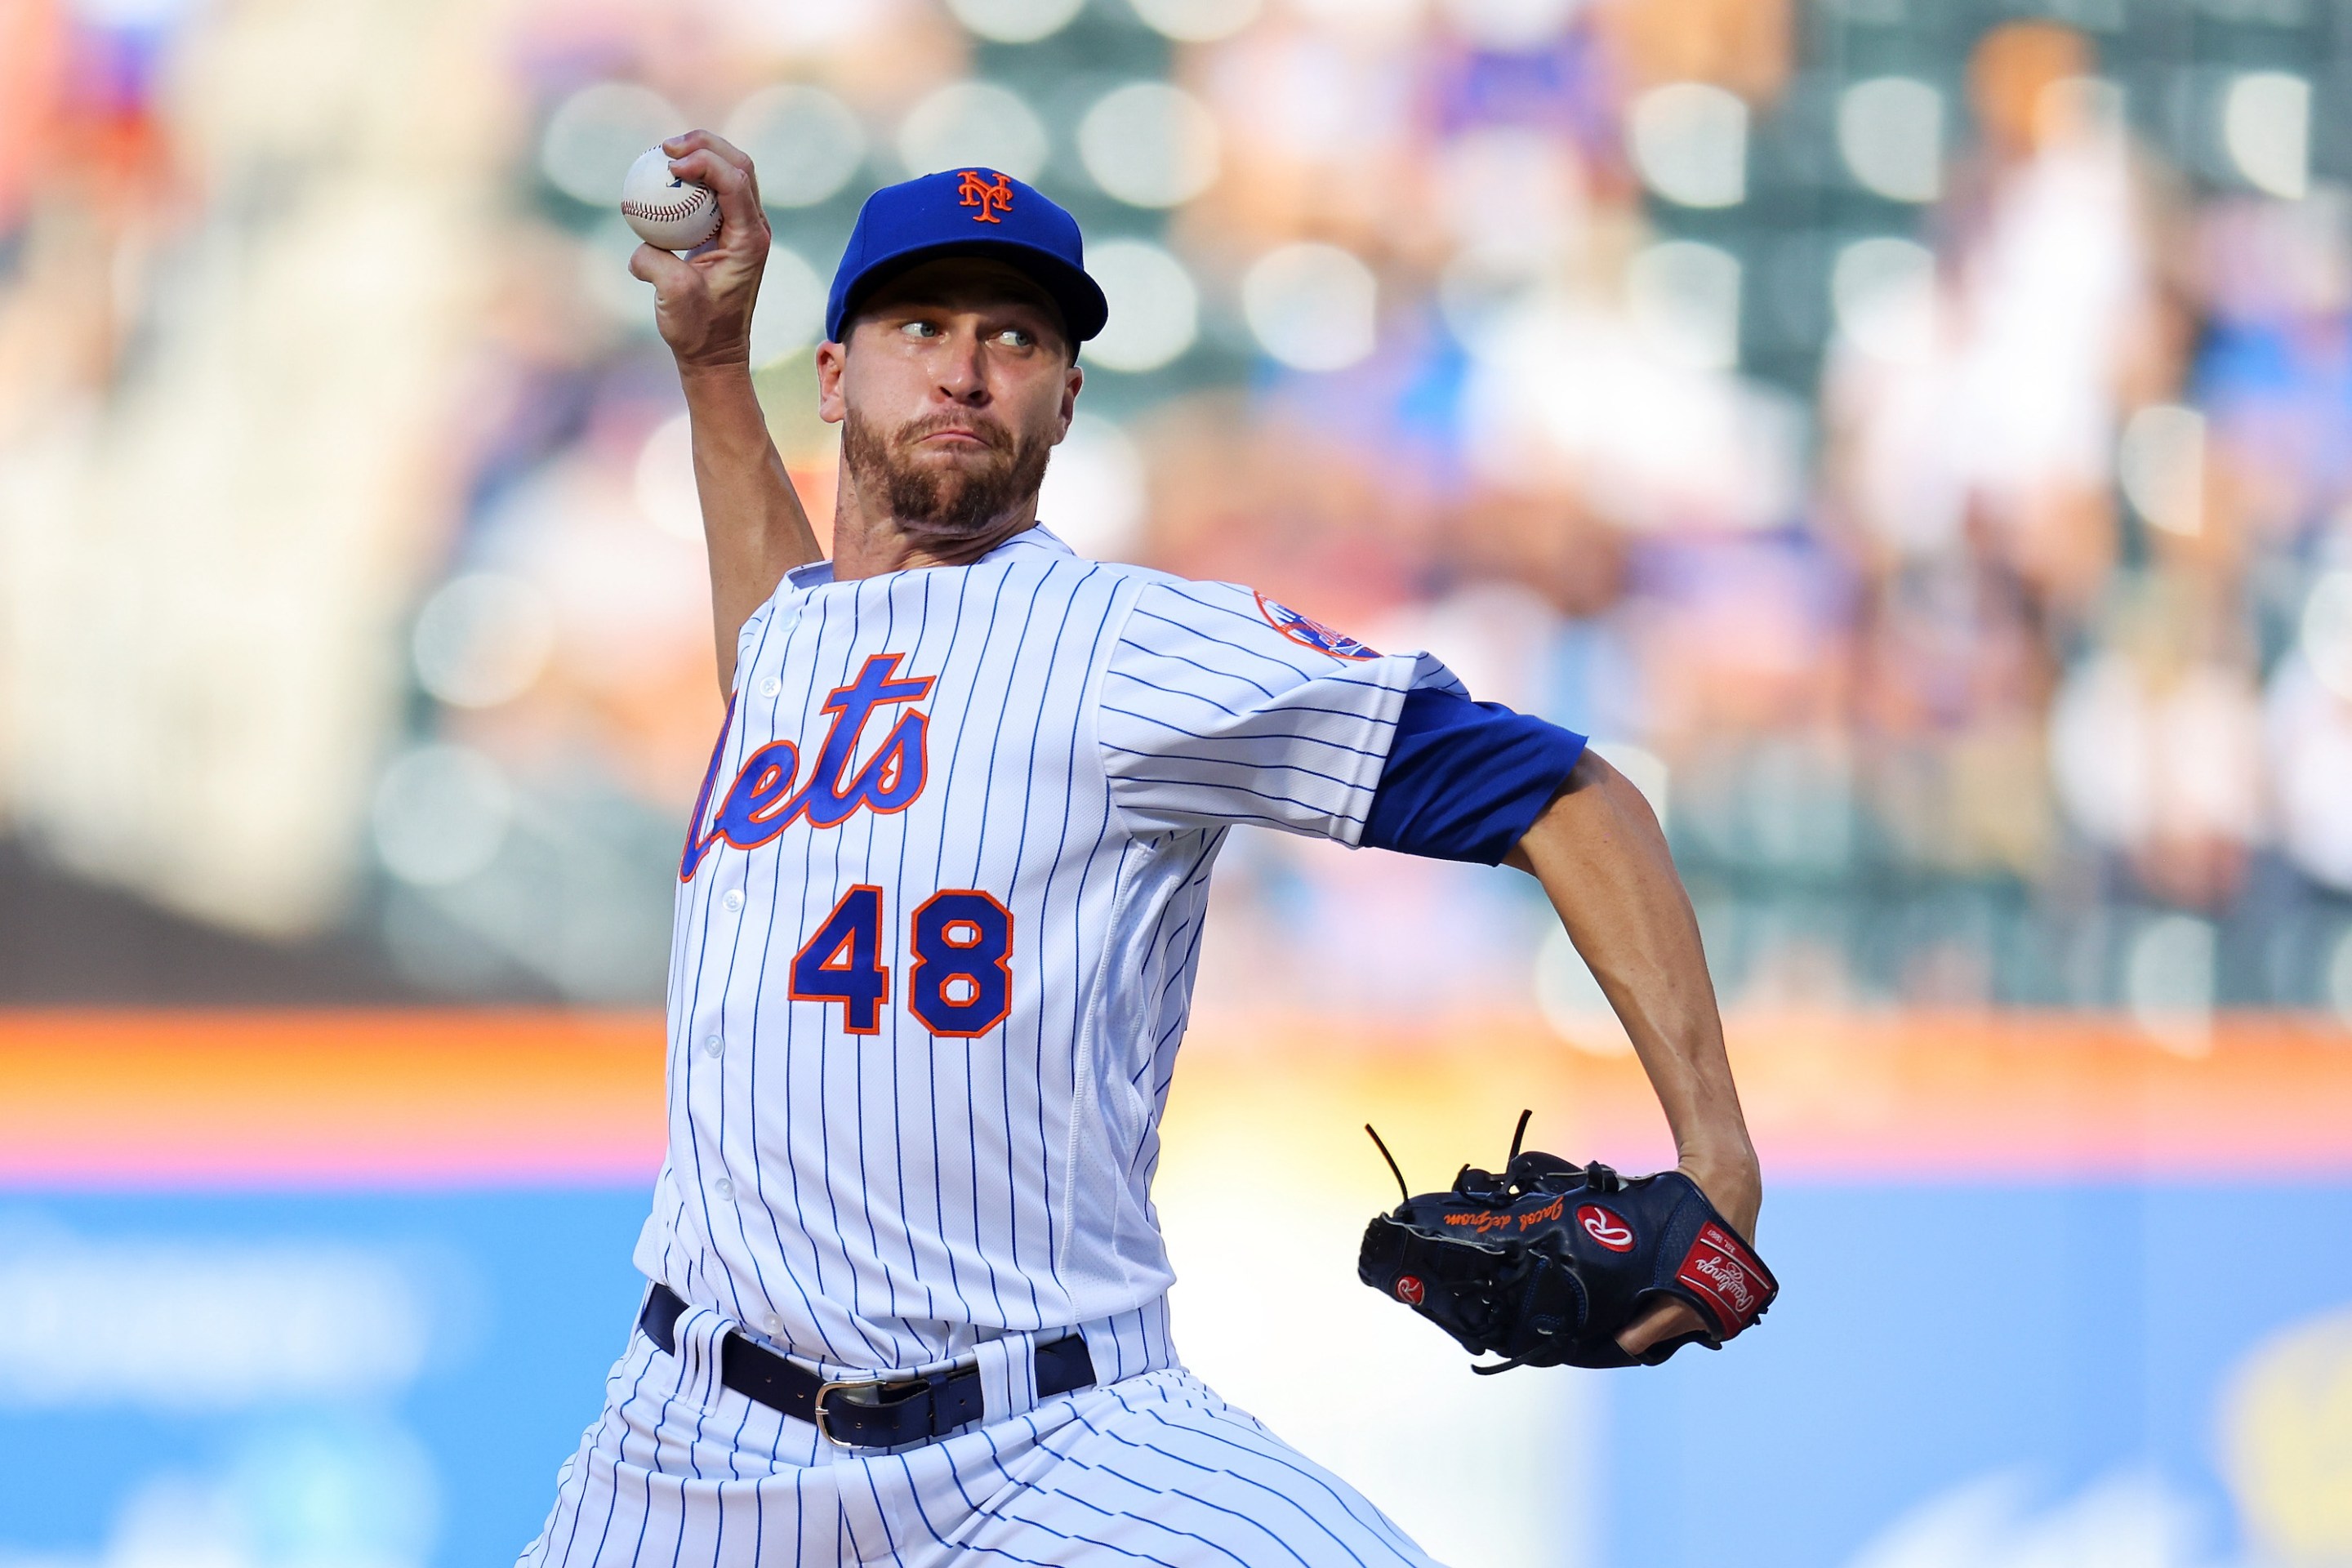 Jacob deGrom pitching against the Atlanta Braves on August 7, 2022, when he was perfect for five-and-two-thirds innings.